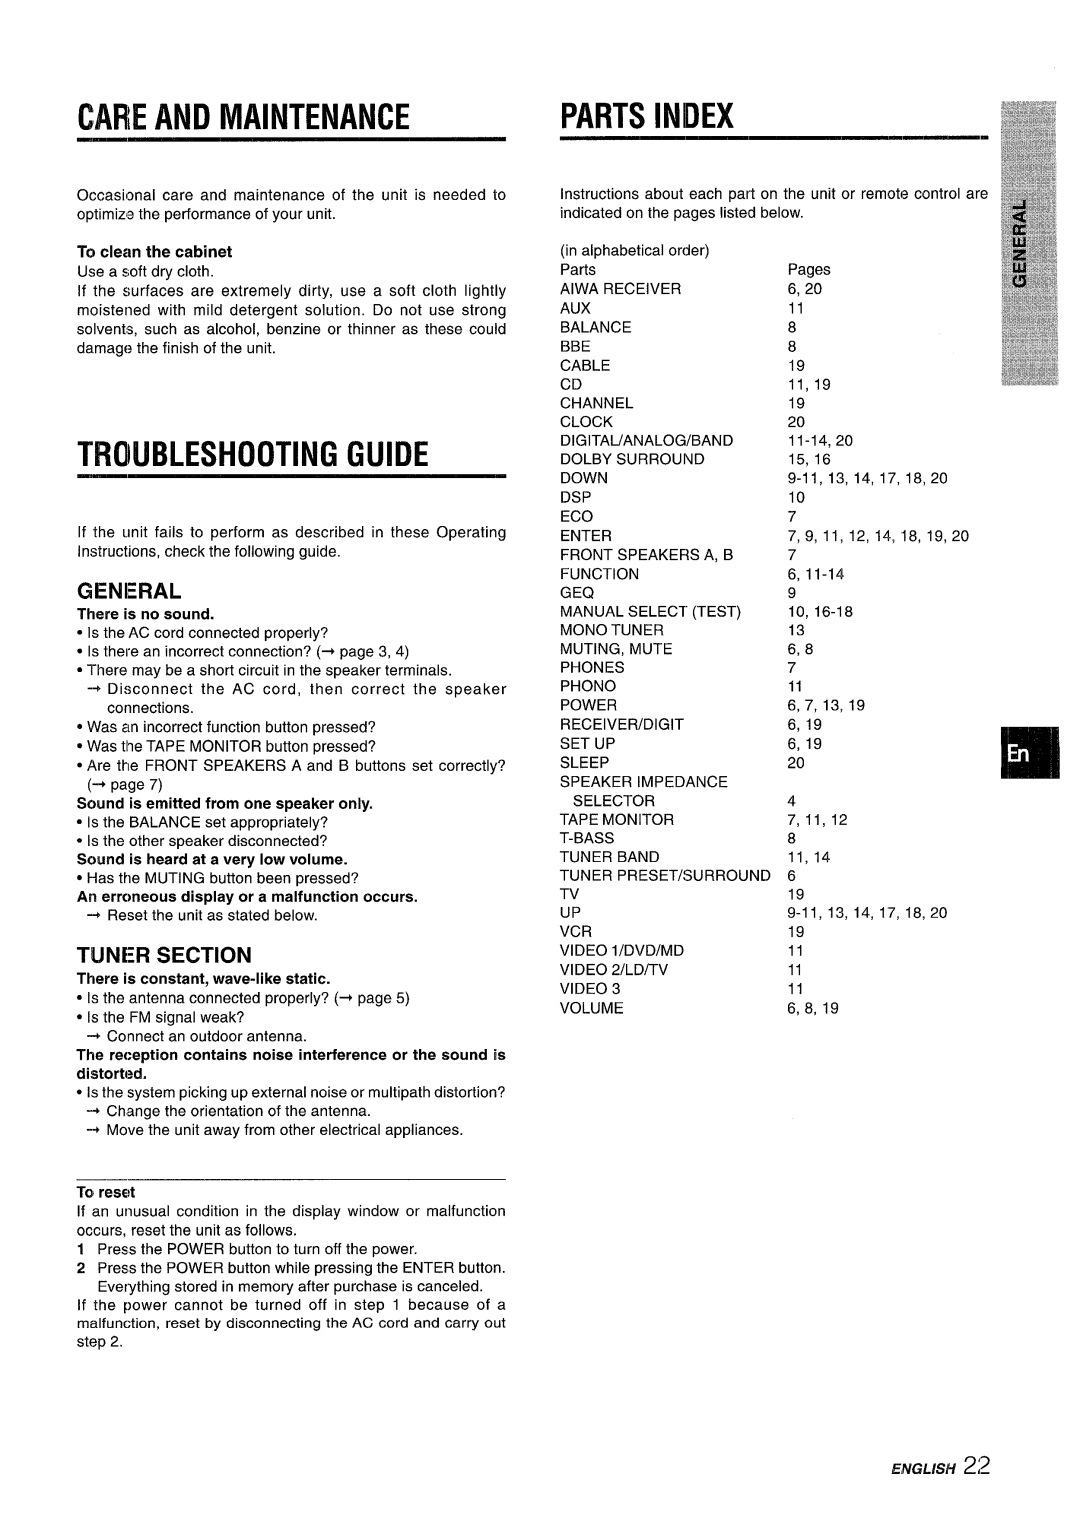 Sony AV-DV75 manual Troubleshooting Guide, Care And Maintenance, Parts Index, HWLSH22, General, Tuner Section 